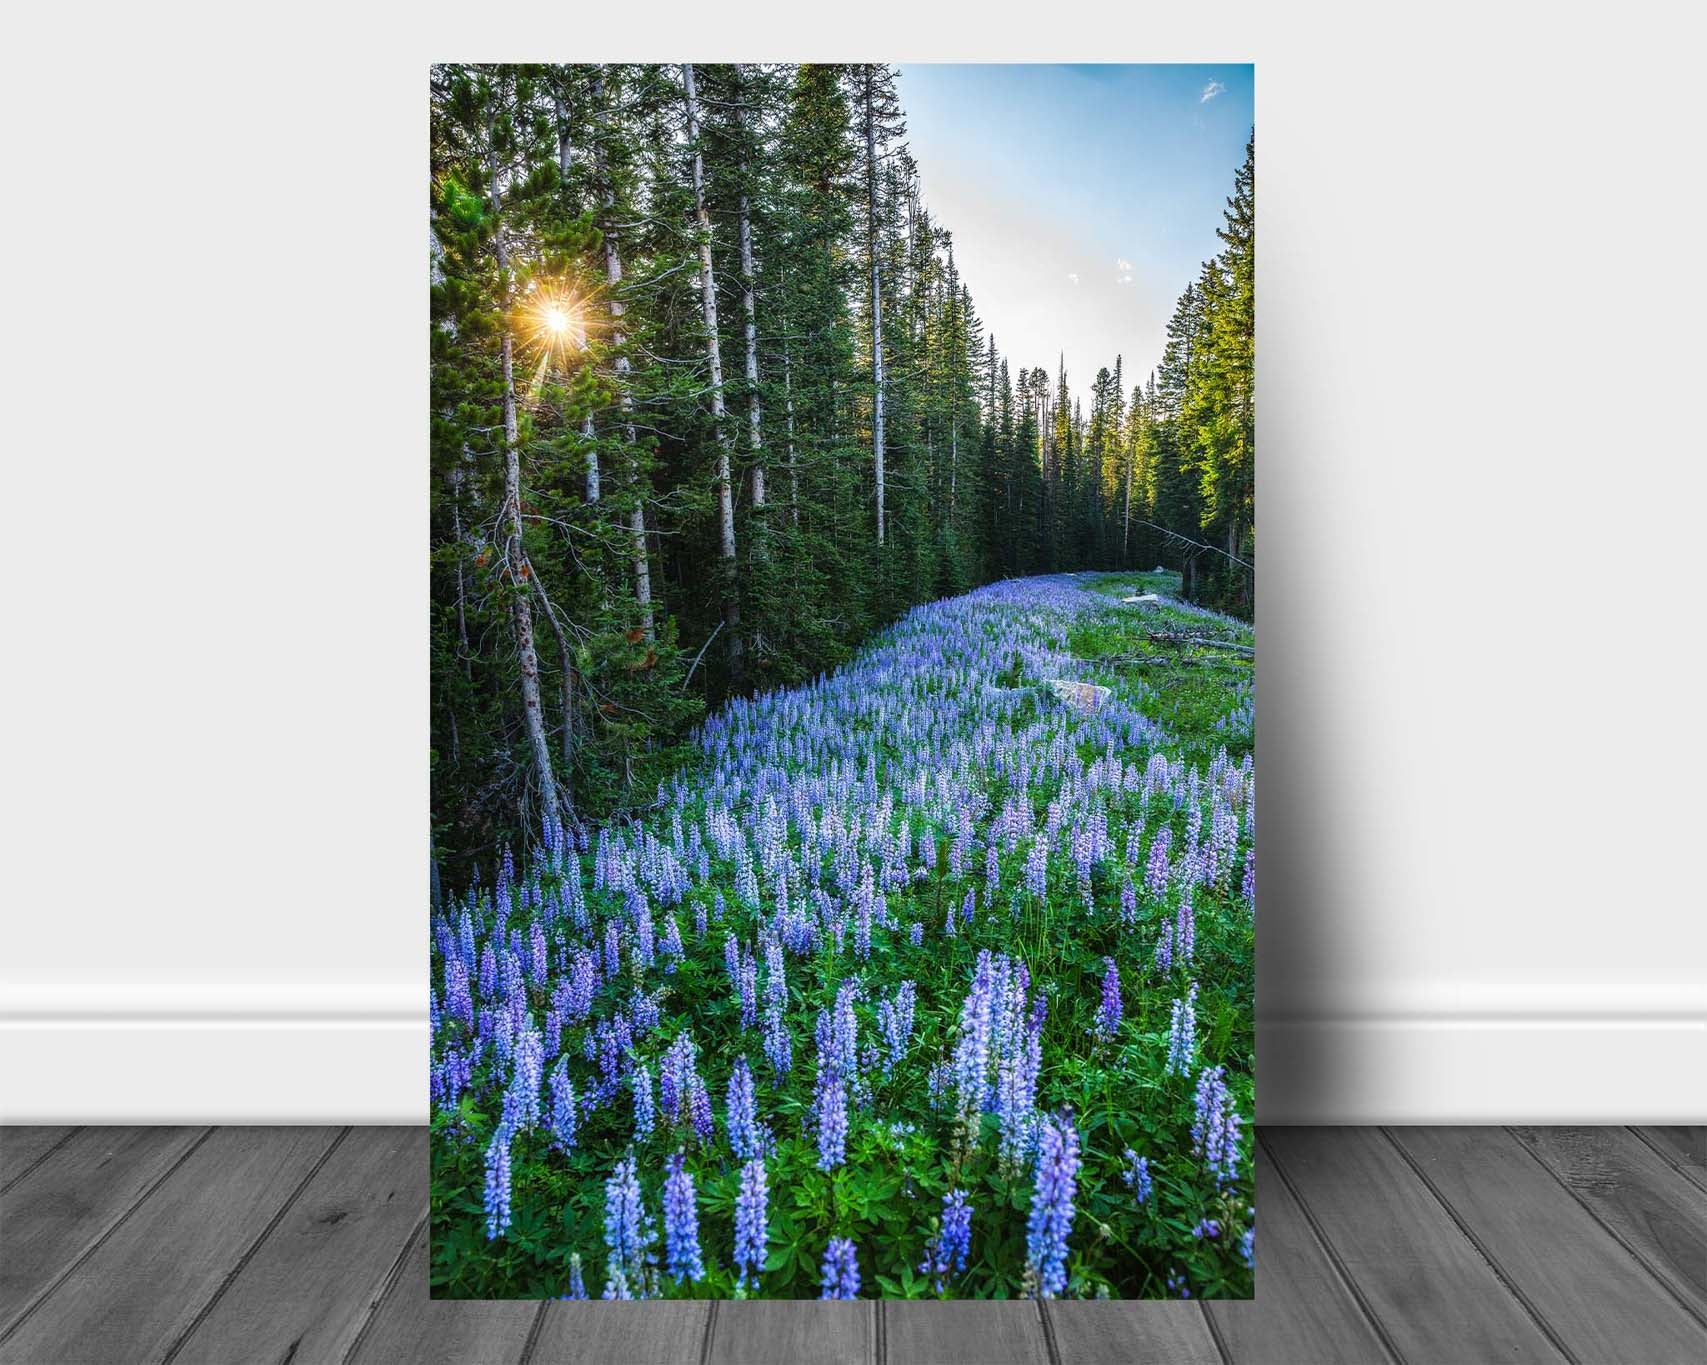 Rocky Mountains metal print of purple lupine wildflowers covering the forest floor as the sun twinkles through pine trees on a summer day in Montana by Sean Ramsey of Southern Plains Photography.